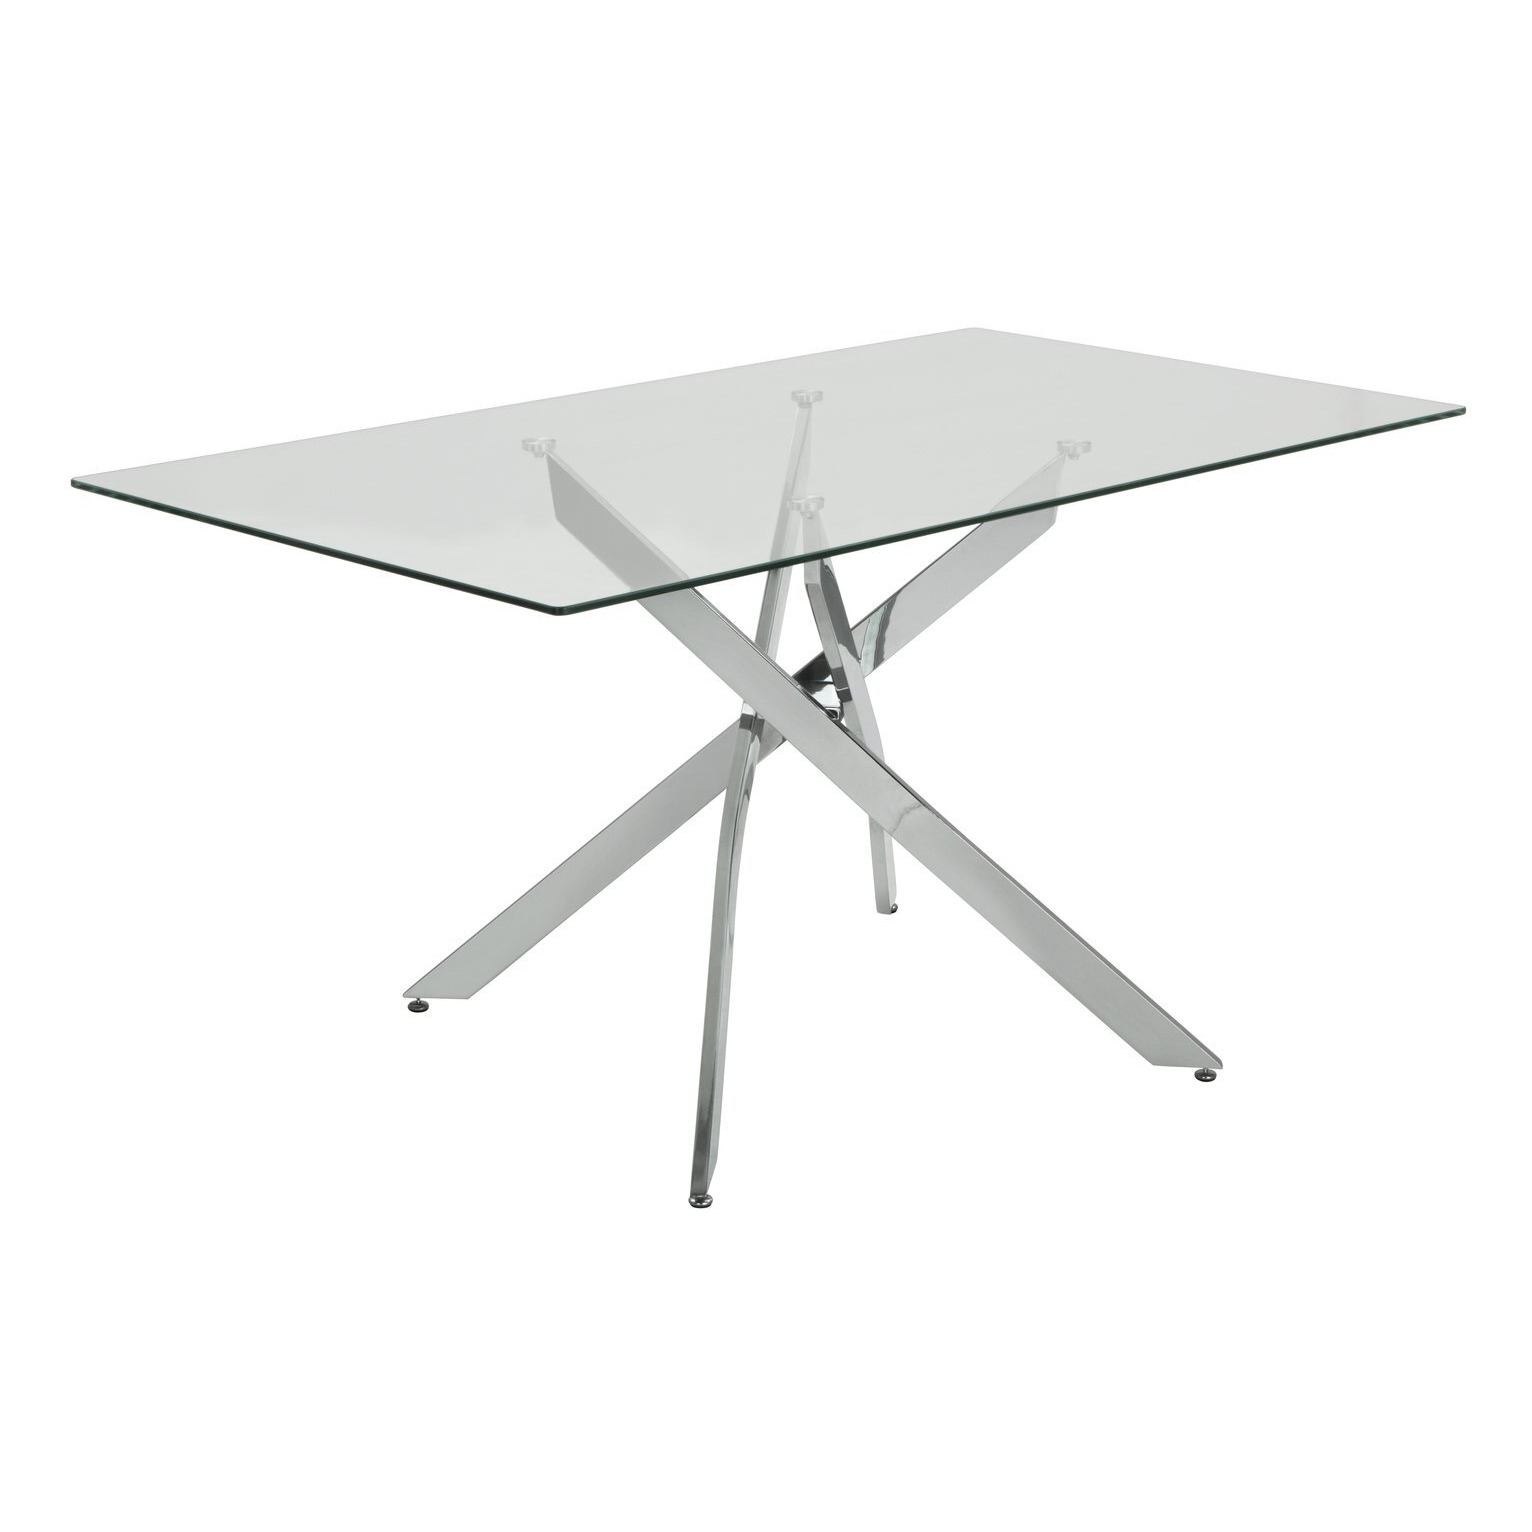 Argos Home Blake Glass 6 Seater Dining Table - image 1